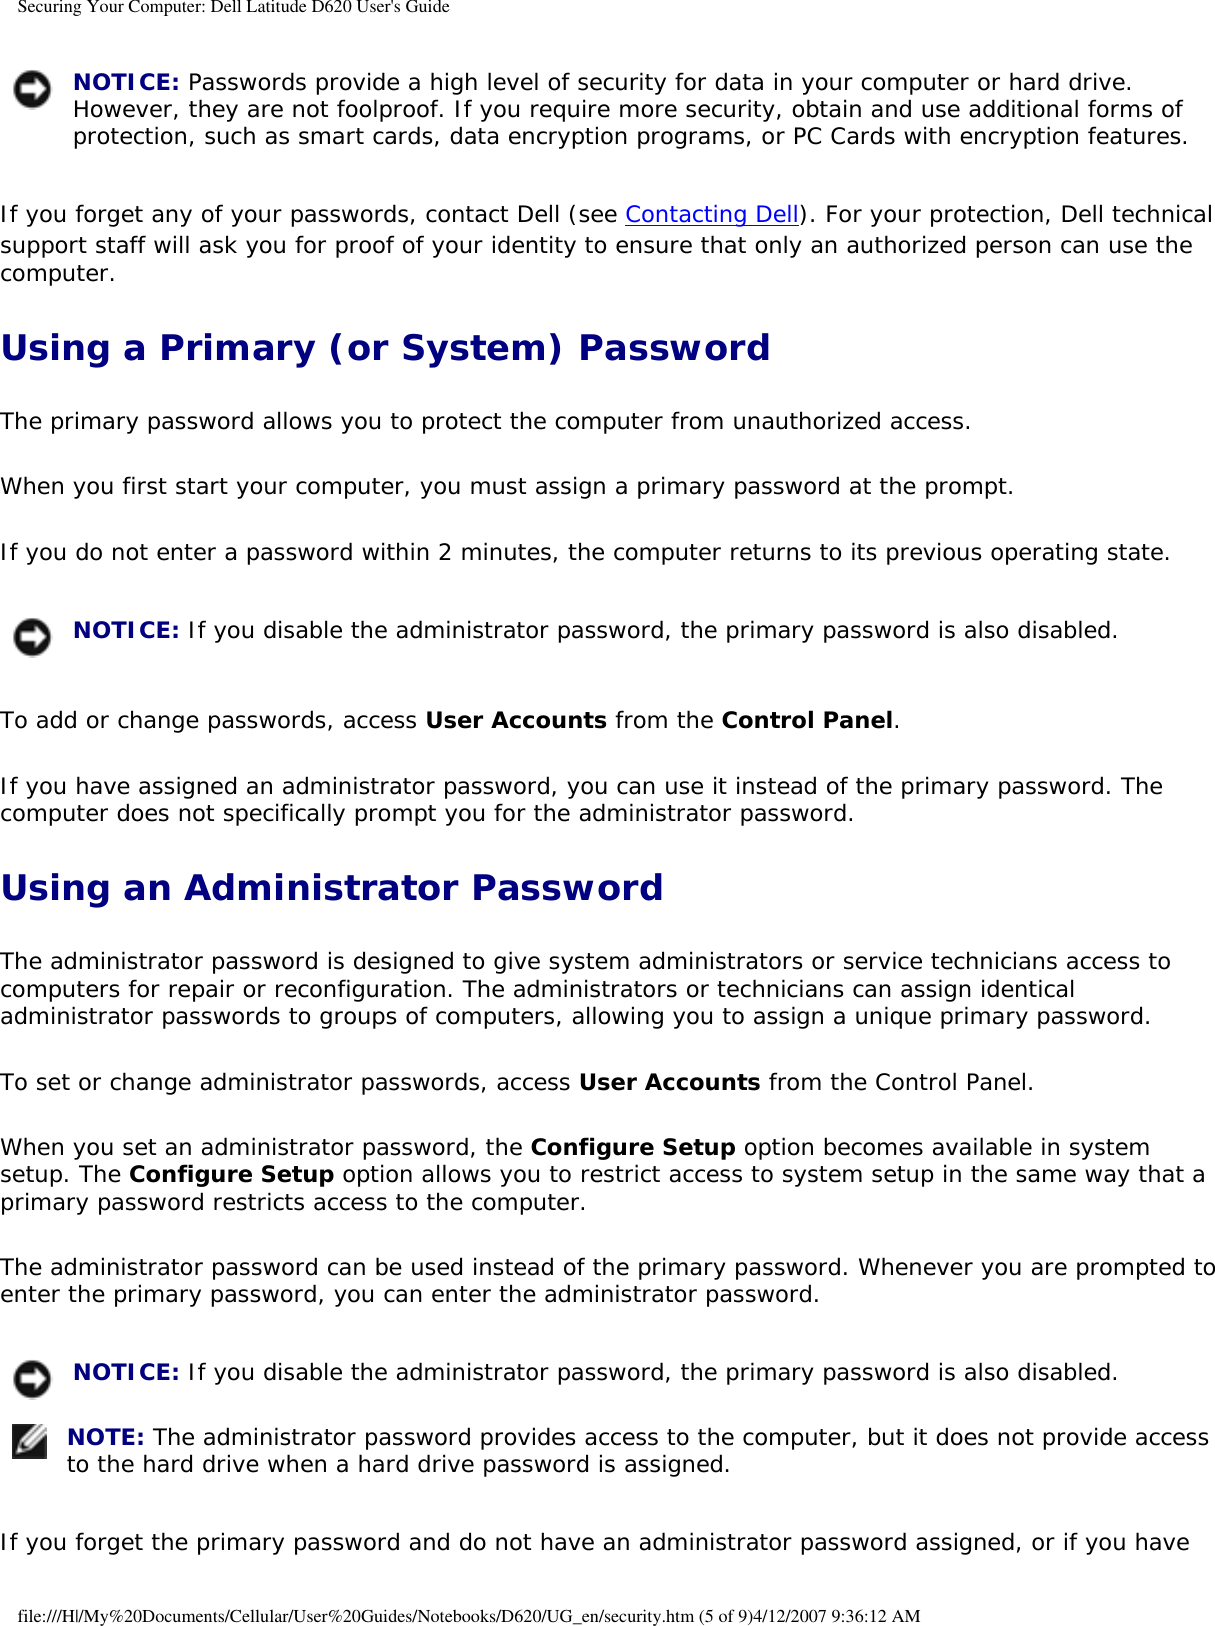 Securing Your Computer: Dell Latitude D620 User&apos;s Guide NOTICE: Passwords provide a high level of security for data in your computer or hard drive. However, they are not foolproof. If you require more security, obtain and use additional forms of protection, such as smart cards, data encryption programs, or PC Cards with encryption features. If you forget any of your passwords, contact Dell (see Contacting Dell). For your protection, Dell technical support staff will ask you for proof of your identity to ensure that only an authorized person can use the computer.Using a Primary (or System) PasswordThe primary password allows you to protect the computer from unauthorized access.When you first start your computer, you must assign a primary password at the prompt.If you do not enter a password within 2 minutes, the computer returns to its previous operating state. NOTICE: If you disable the administrator password, the primary password is also disabled.To add or change passwords, access User Accounts from the Control Panel. If you have assigned an administrator password, you can use it instead of the primary password. The computer does not specifically prompt you for the administrator password.Using an Administrator PasswordThe administrator password is designed to give system administrators or service technicians access to computers for repair or reconfiguration. The administrators or technicians can assign identical administrator passwords to groups of computers, allowing you to assign a unique primary password.To set or change administrator passwords, access User Accounts from the Control Panel.When you set an administrator password, the Configure Setup option becomes available in system setup. The Configure Setup option allows you to restrict access to system setup in the same way that a primary password restricts access to the computer.The administrator password can be used instead of the primary password. Whenever you are prompted to enter the primary password, you can enter the administrator password. NOTICE: If you disable the administrator password, the primary password is also disabled. NOTE: The administrator password provides access to the computer, but it does not provide access to the hard drive when a hard drive password is assigned. If you forget the primary password and do not have an administrator password assigned, or if you have file:///H|/My%20Documents/Cellular/User%20Guides/Notebooks/D620/UG_en/security.htm (5 of 9)4/12/2007 9:36:12 AM